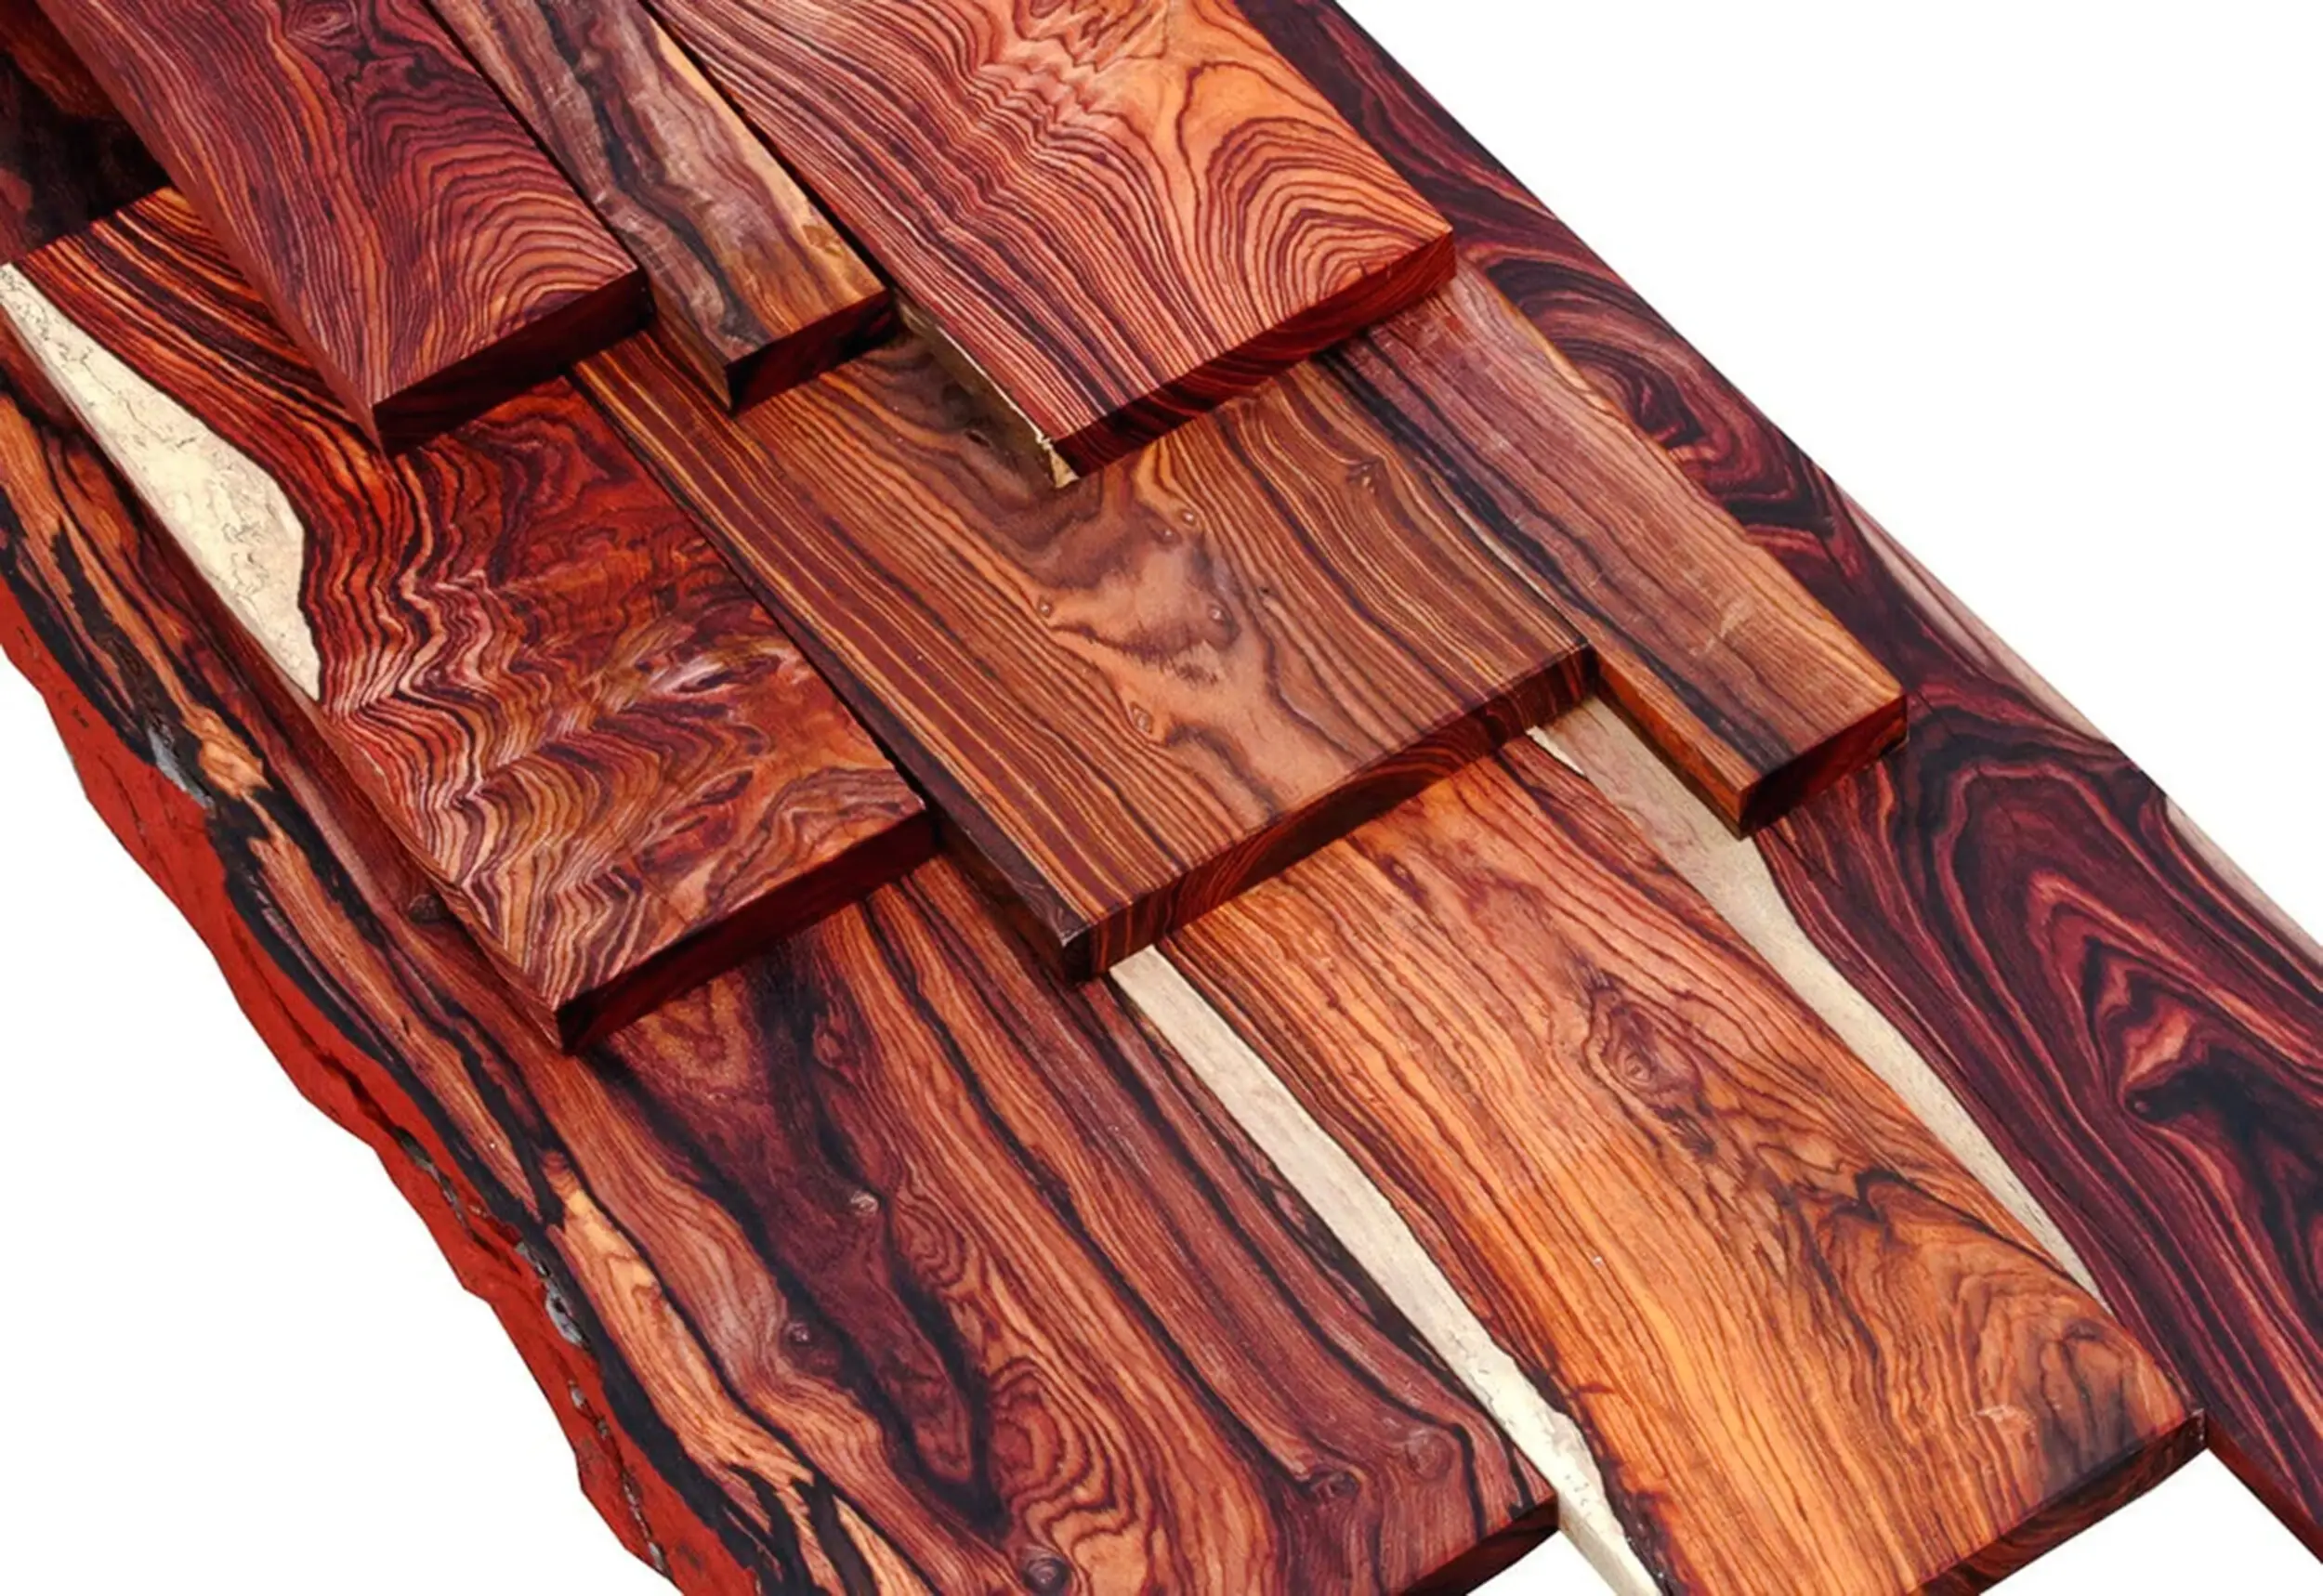 Known for its oiliness and high density, Cocobolo is a variety of rosewood that is often used in making musical instruments. Its natural resilience and unique tonal properties contribute to the creation of durable and high-quality instruments.